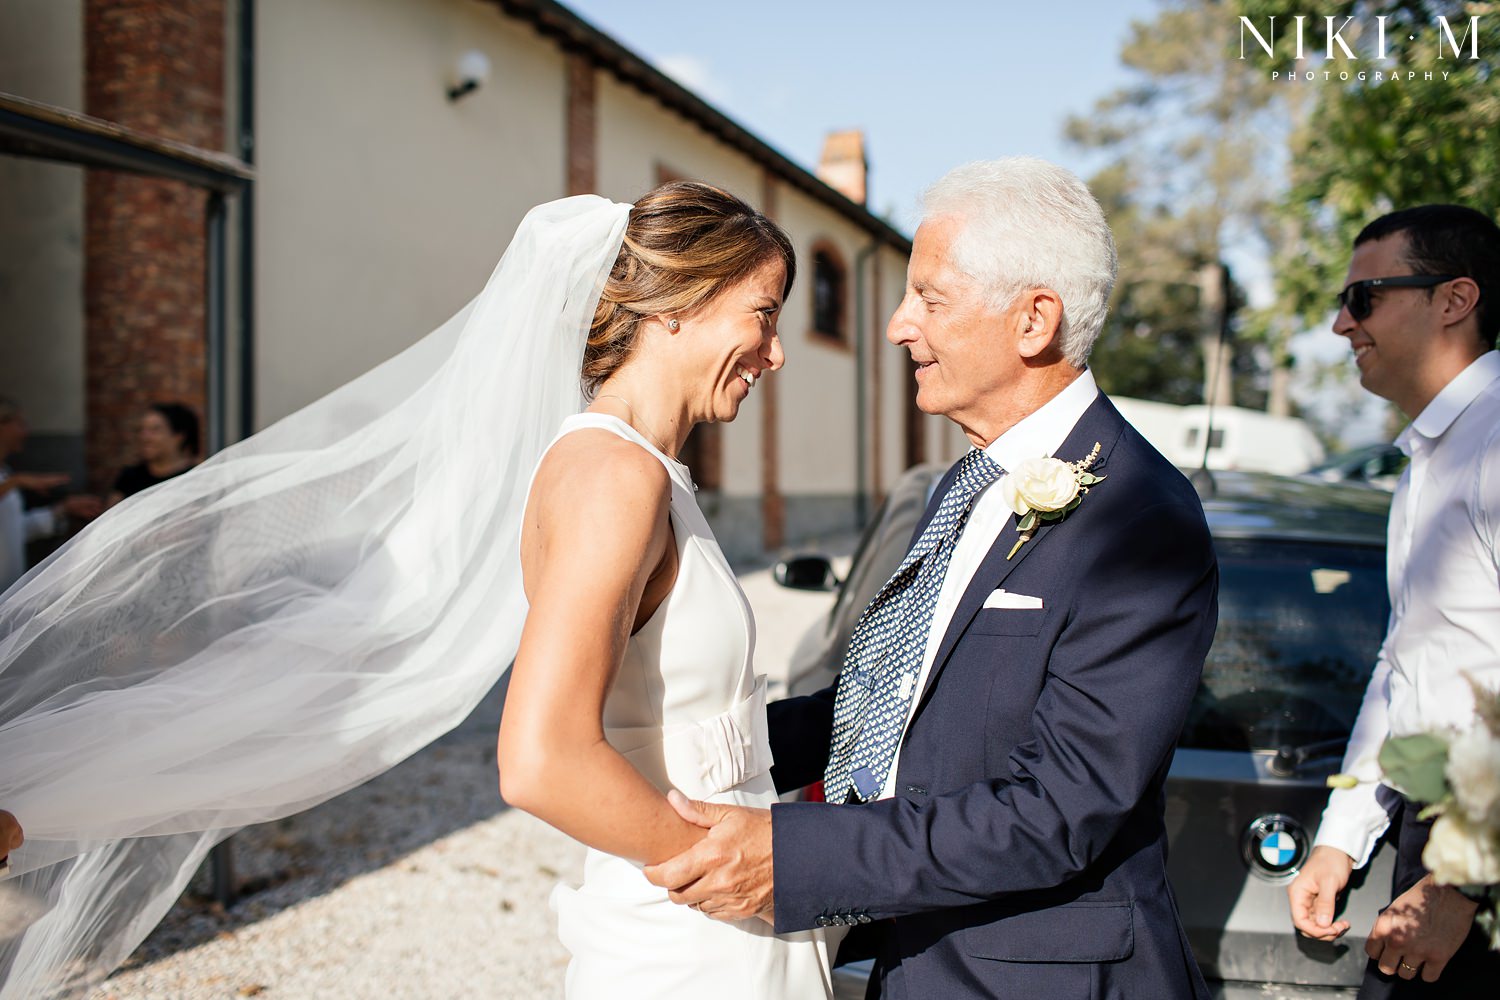 The bride sees her dad for the first time at her wedding in Tuscany, Italy